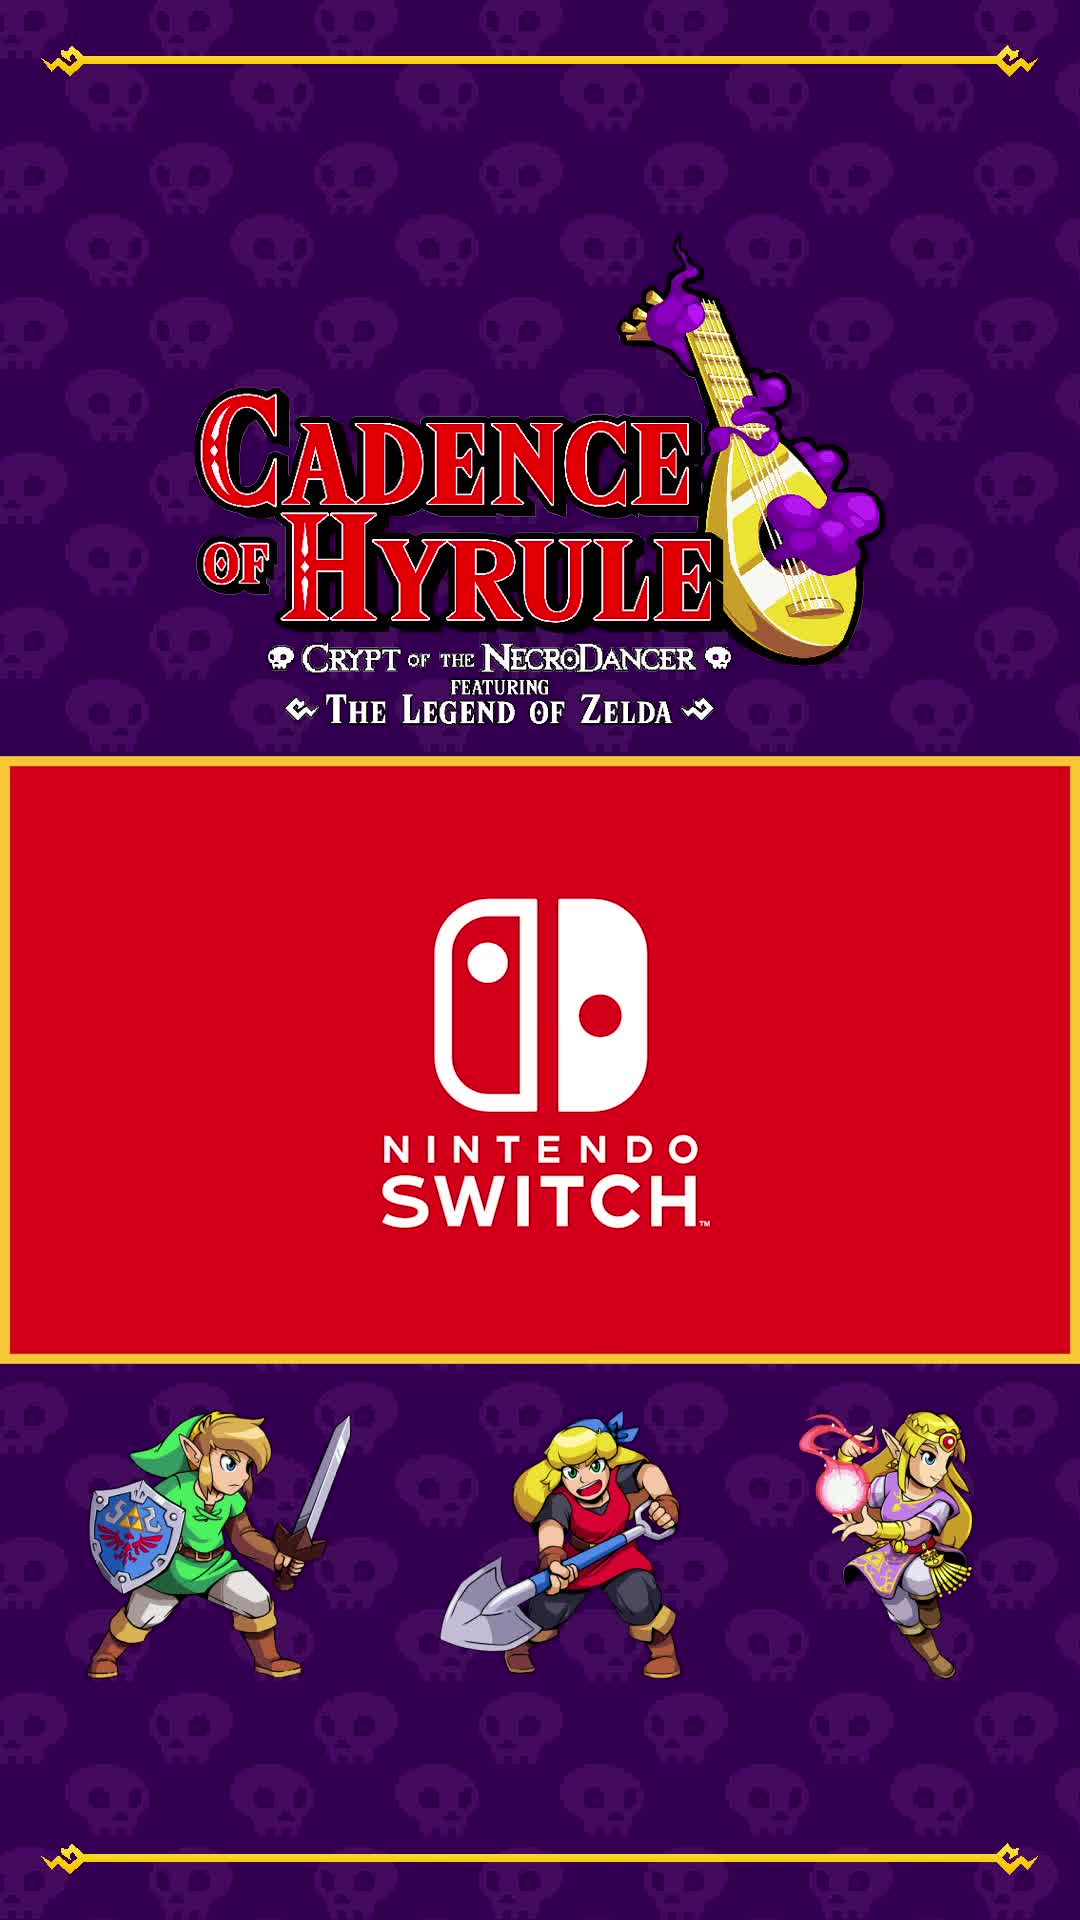 get_the_best_Cadence_ad